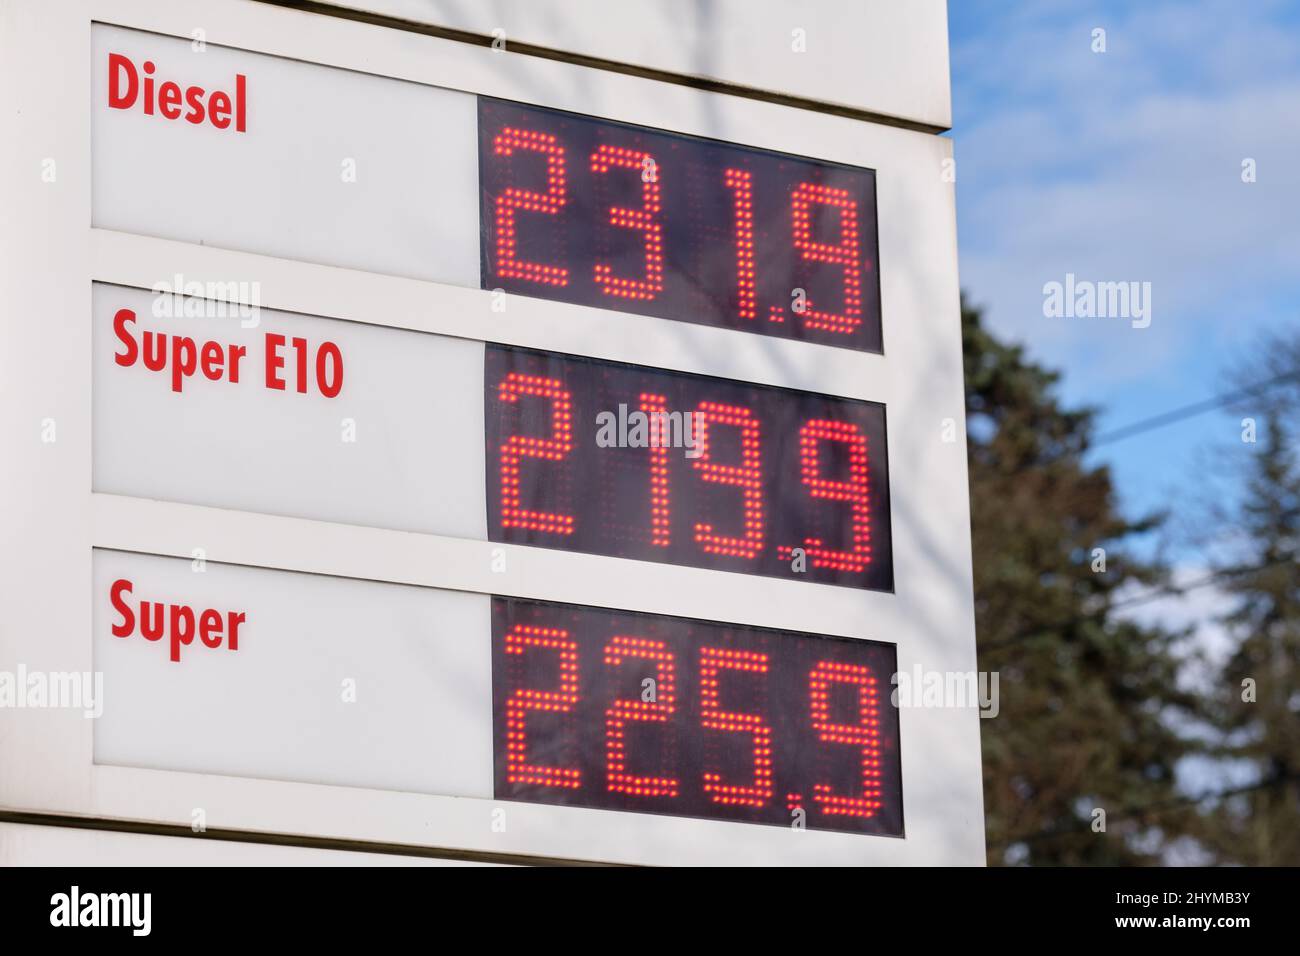 Close-up of a sign at a gas station showing extremely high gasoline prices due to the war in Ukraine. Seen in Germany on March 14, 2022 Stock Photo